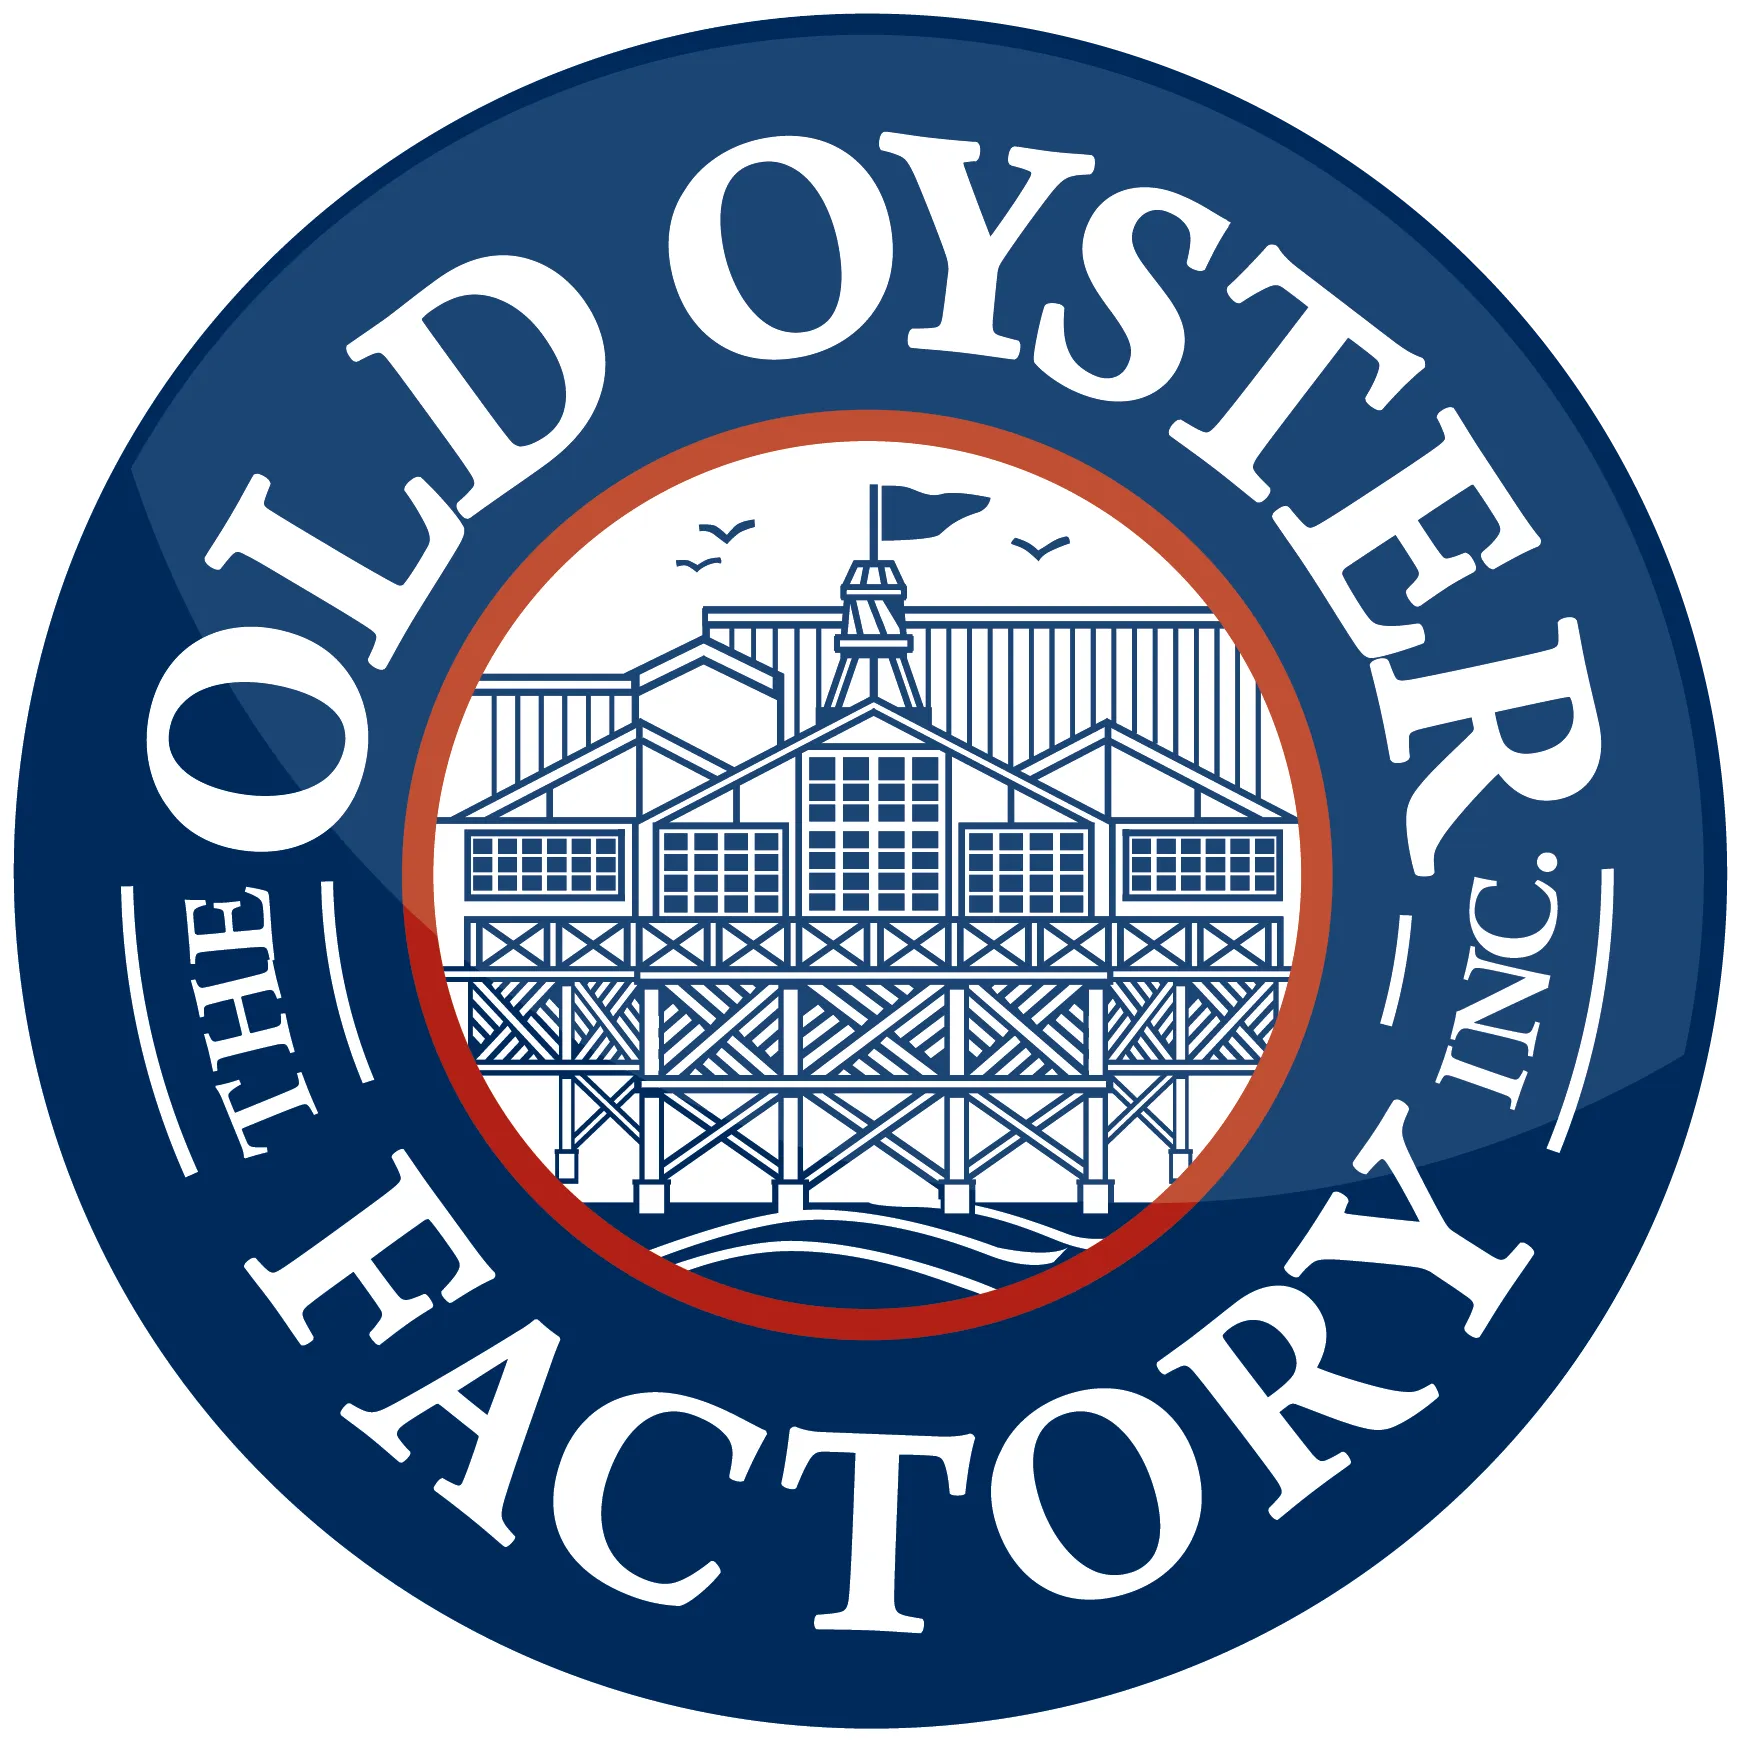 Old Oyster Factory